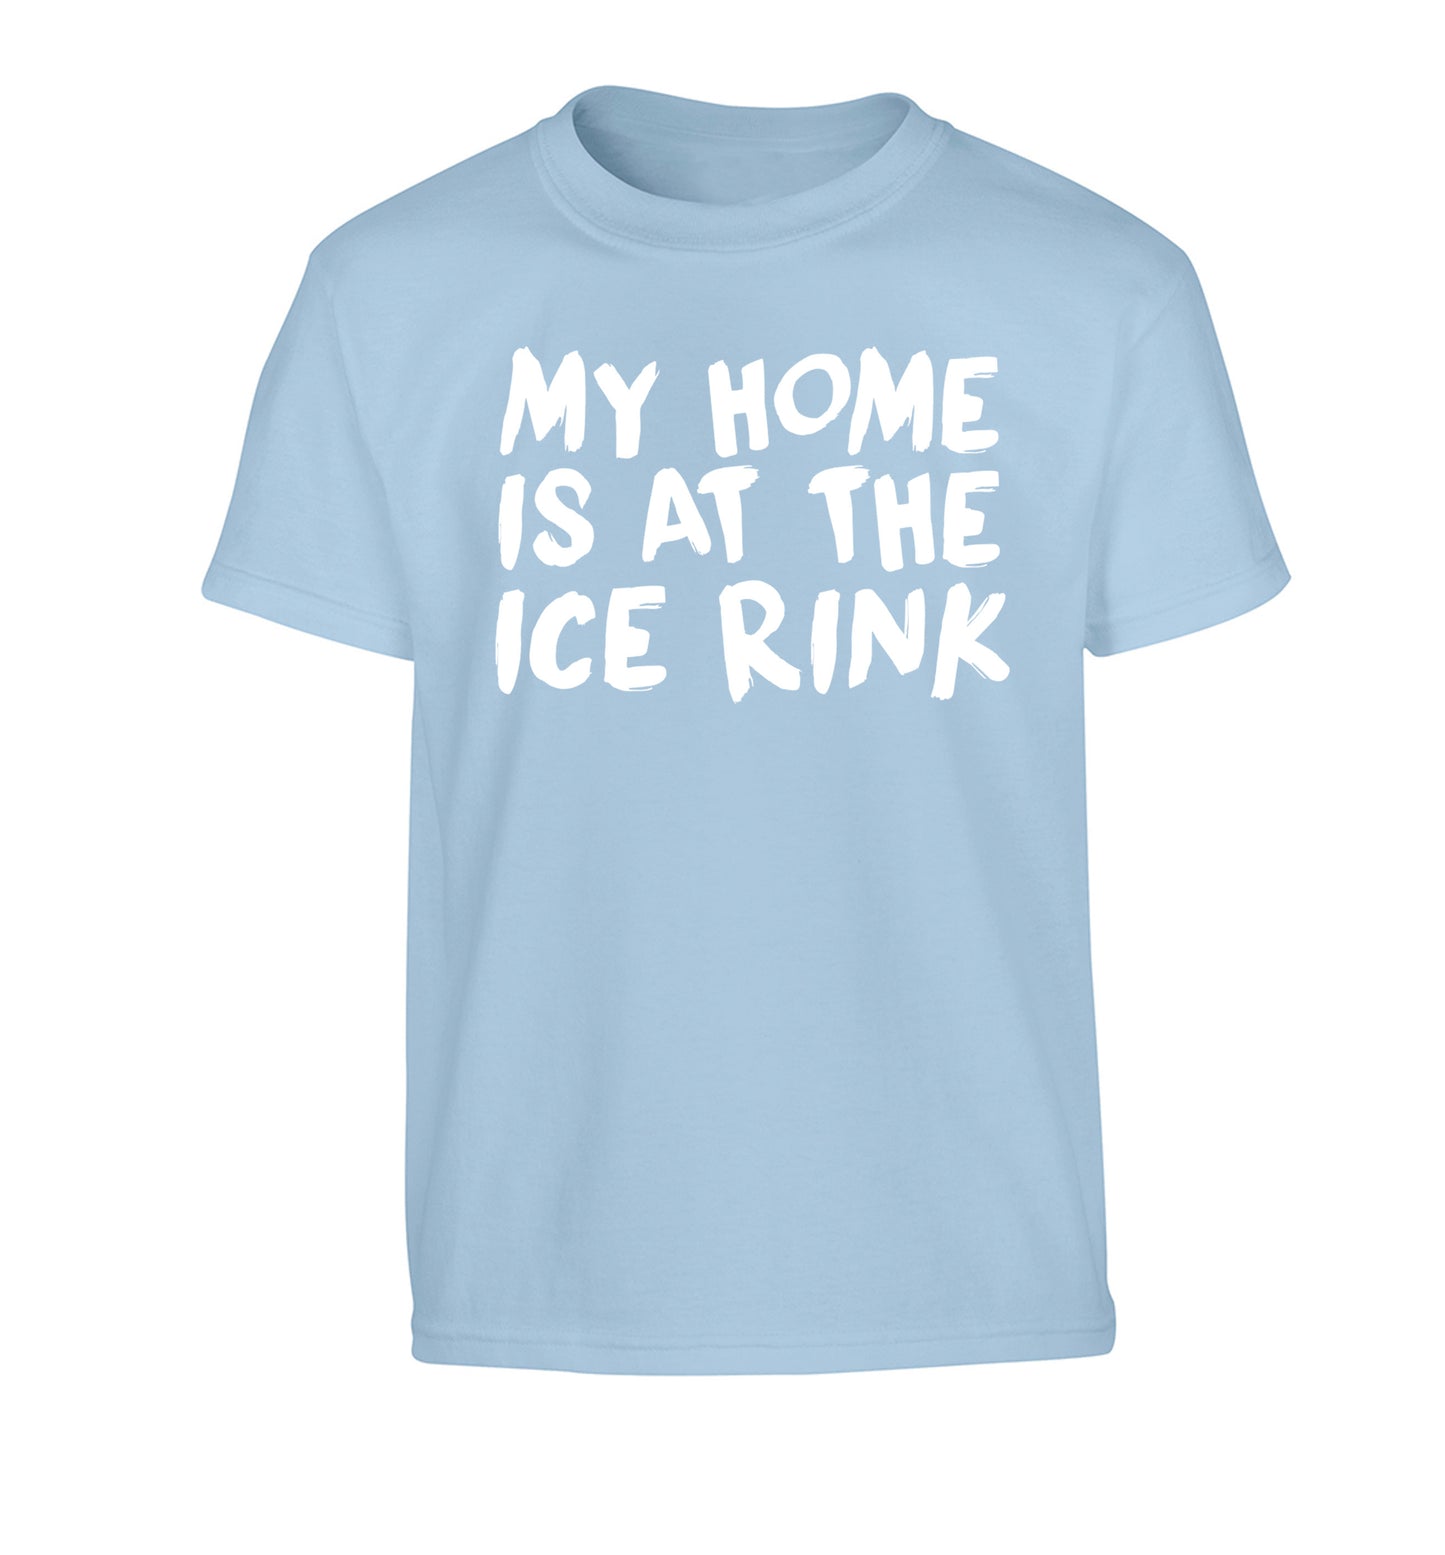 My home is at the ice rink Children's light blue Tshirt 12-14 Years